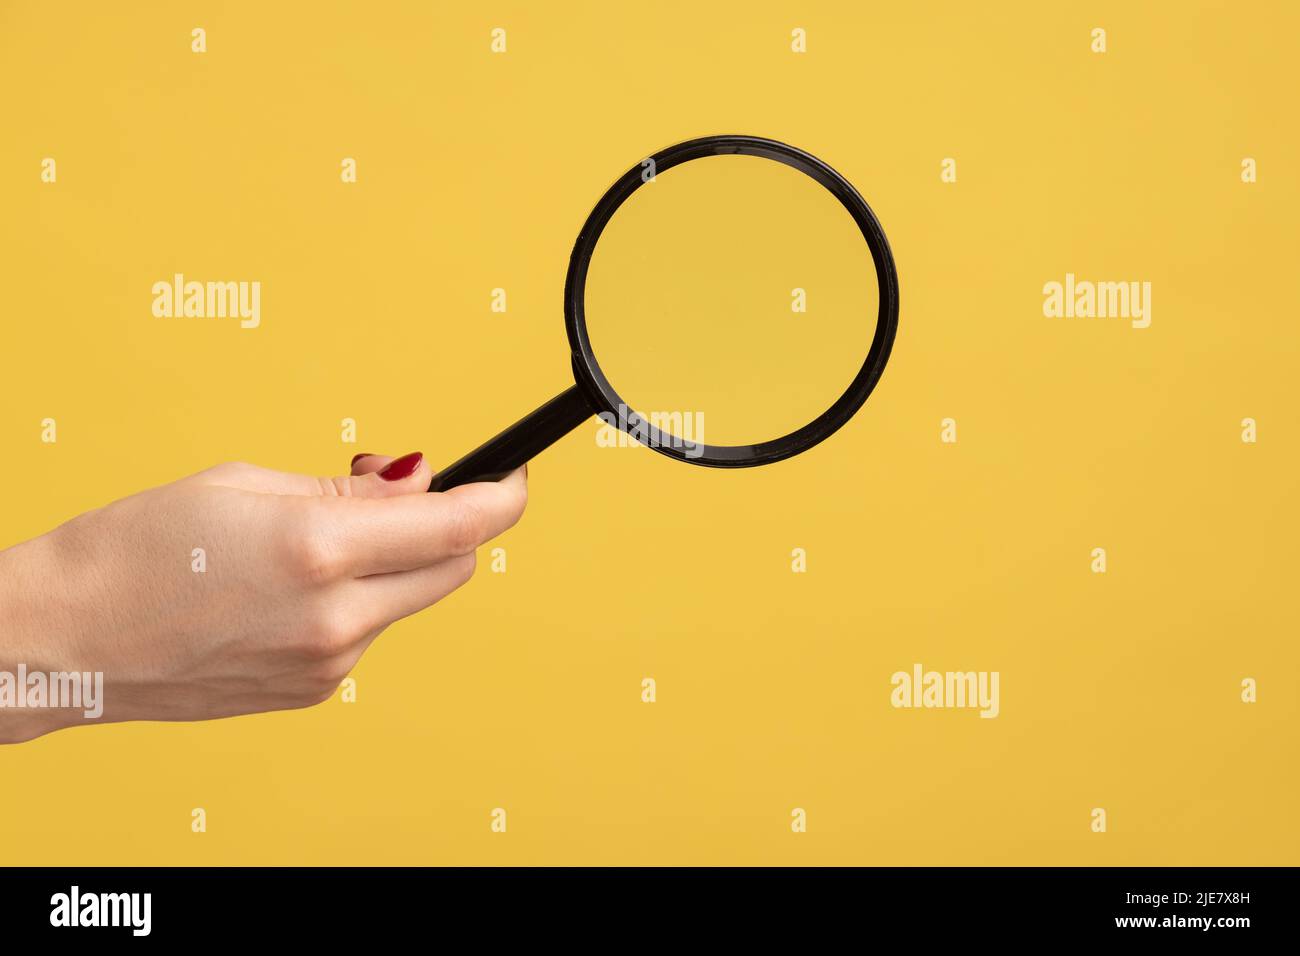 Profile side view closeup of woman hand holding magnify glass, loupe. Indoor studio shot isolated on yellow background. Stock Photo